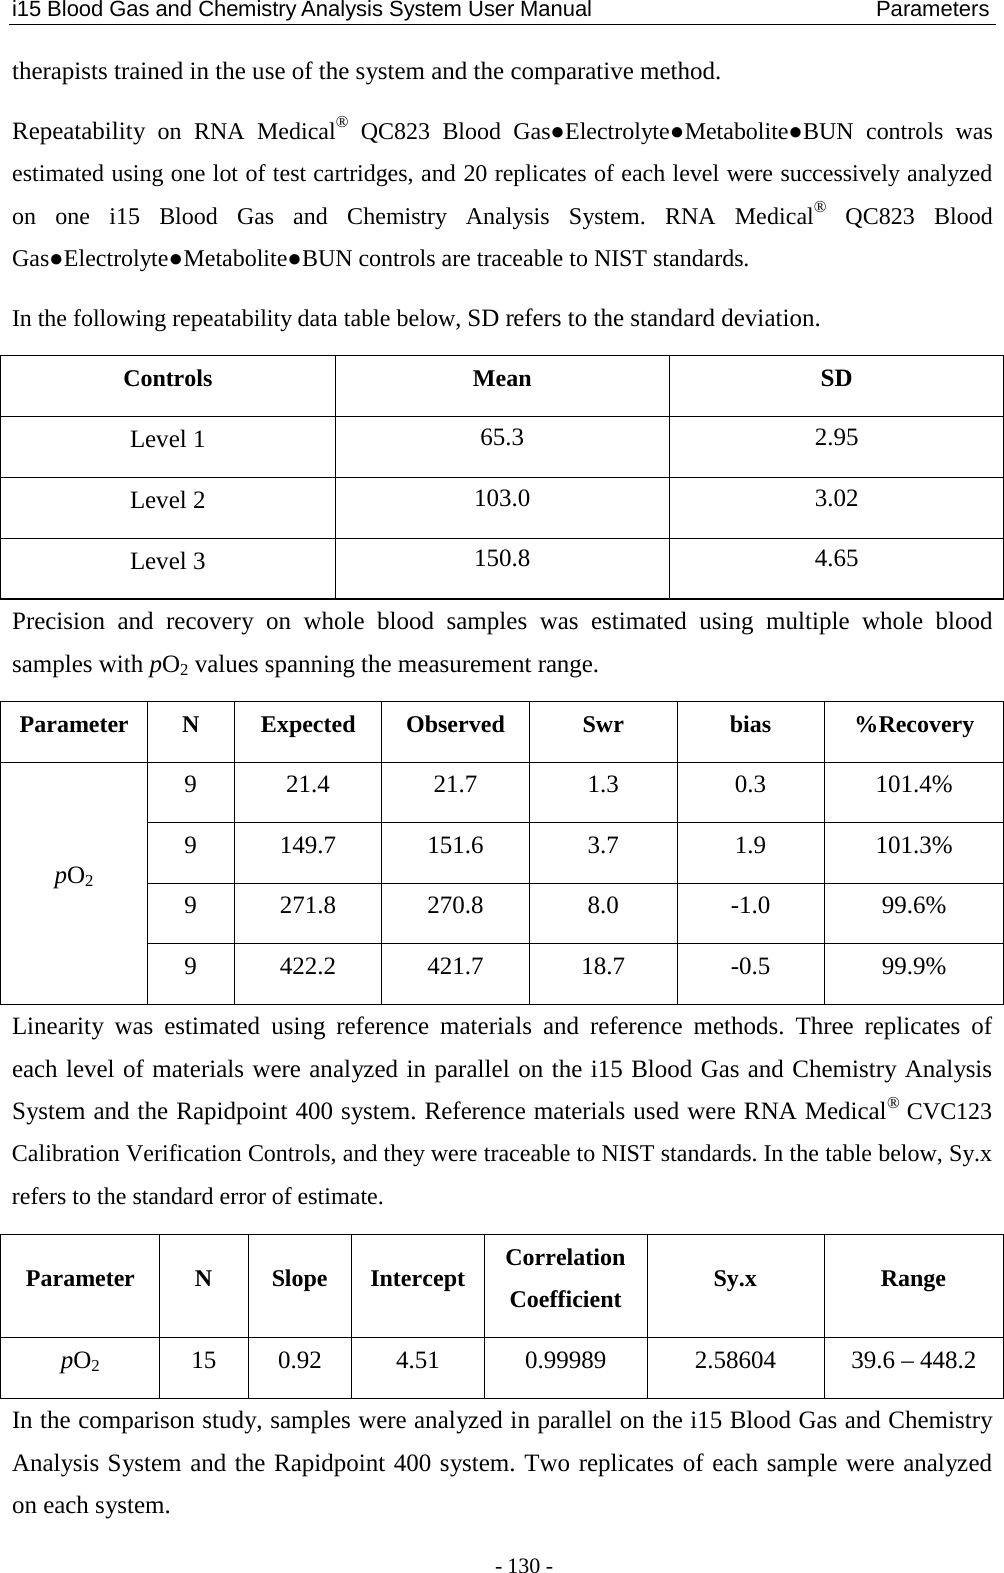 i15 Blood Gas and Chemistry Analysis System User Manual                            Parameters - 130 - therapists trained in the use of the system and the comparative method. Repeatability on RNA Medical® QC823 Blood Gas●Electrolyte●Metabolite●BUN  controls  was estimated using one lot of test cartridges, and 20 replicates of each level were successively analyzed on  one  i15 Blood Gas and Chemistry Analysis System. RNA Medical® QC823 Blood Gas●Electrolyte●Metabolite●BUN controls are traceable to NIST standards. In the following repeatability data table below, SD refers to the standard deviation. Controls  Mean SD Level 1 65.3  2.95 Level 2  103.0  3.02 Level 3 150.8  4.65 Precision and recovery on whole blood samples was estimated using multiple whole blood samples with pO2 values spanning the measurement range. Parameter  N  Expected  Observed Swr bias %Recovery pO2 9  21.4  21.7  1.3  0.3  101.4% 9  149.7  151.6  3.7  1.9  101.3% 9  271.8  270.8  8.0  -1.0  99.6% 9  422.2  421.7  18.7  -0.5  99.9% Linearity was estimated using reference materials and reference methods. Three replicates of each level of materials were analyzed in parallel on the i15 Blood Gas and Chemistry Analysis System and the Rapidpoint 400 system. Reference materials used were RNA Medical® CVC123 Calibration Verification Controls, and they were traceable to NIST standards. In the table below, Sy.x refers to the standard error of estimate. Parameter  N  Slope Intercept Correlation Coefficient  Sy.x  Range pO2 15  0.92  4.51  0.99989  2.58604  39.6 – 448.2 In the comparison study, samples were analyzed in parallel on the i15 Blood Gas and Chemistry Analysis System and the Rapidpoint 400 system. Two replicates of each sample were analyzed on each system. 